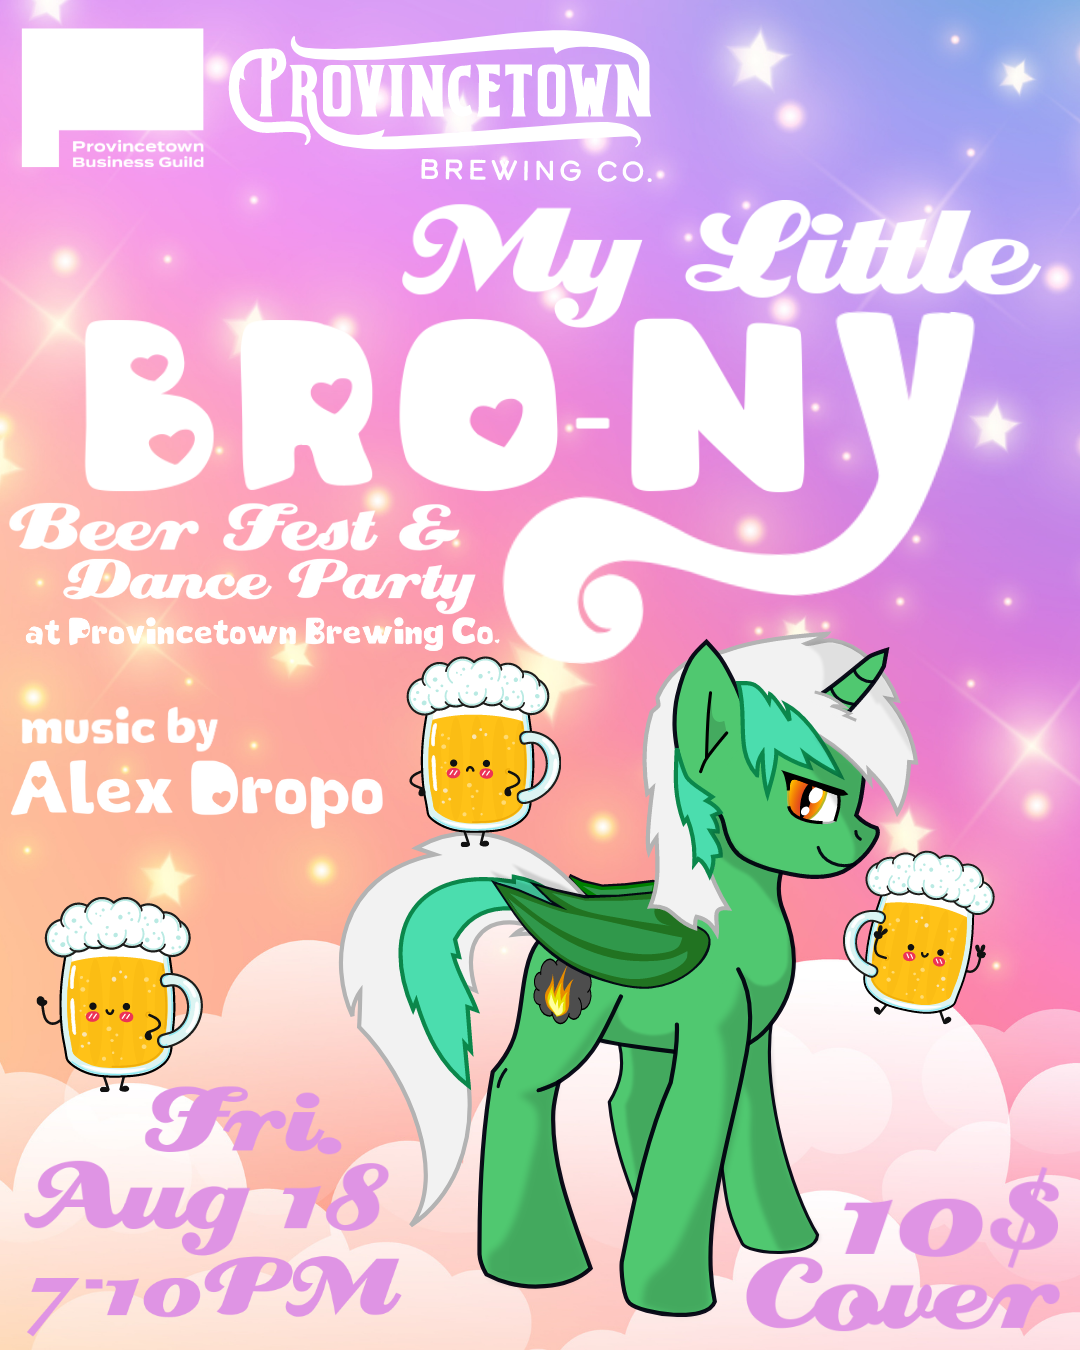 My Little BRO-NY! - Beer Fest & Dance Party at Provincetown Brewing Co. -  Provincetown Business Guild